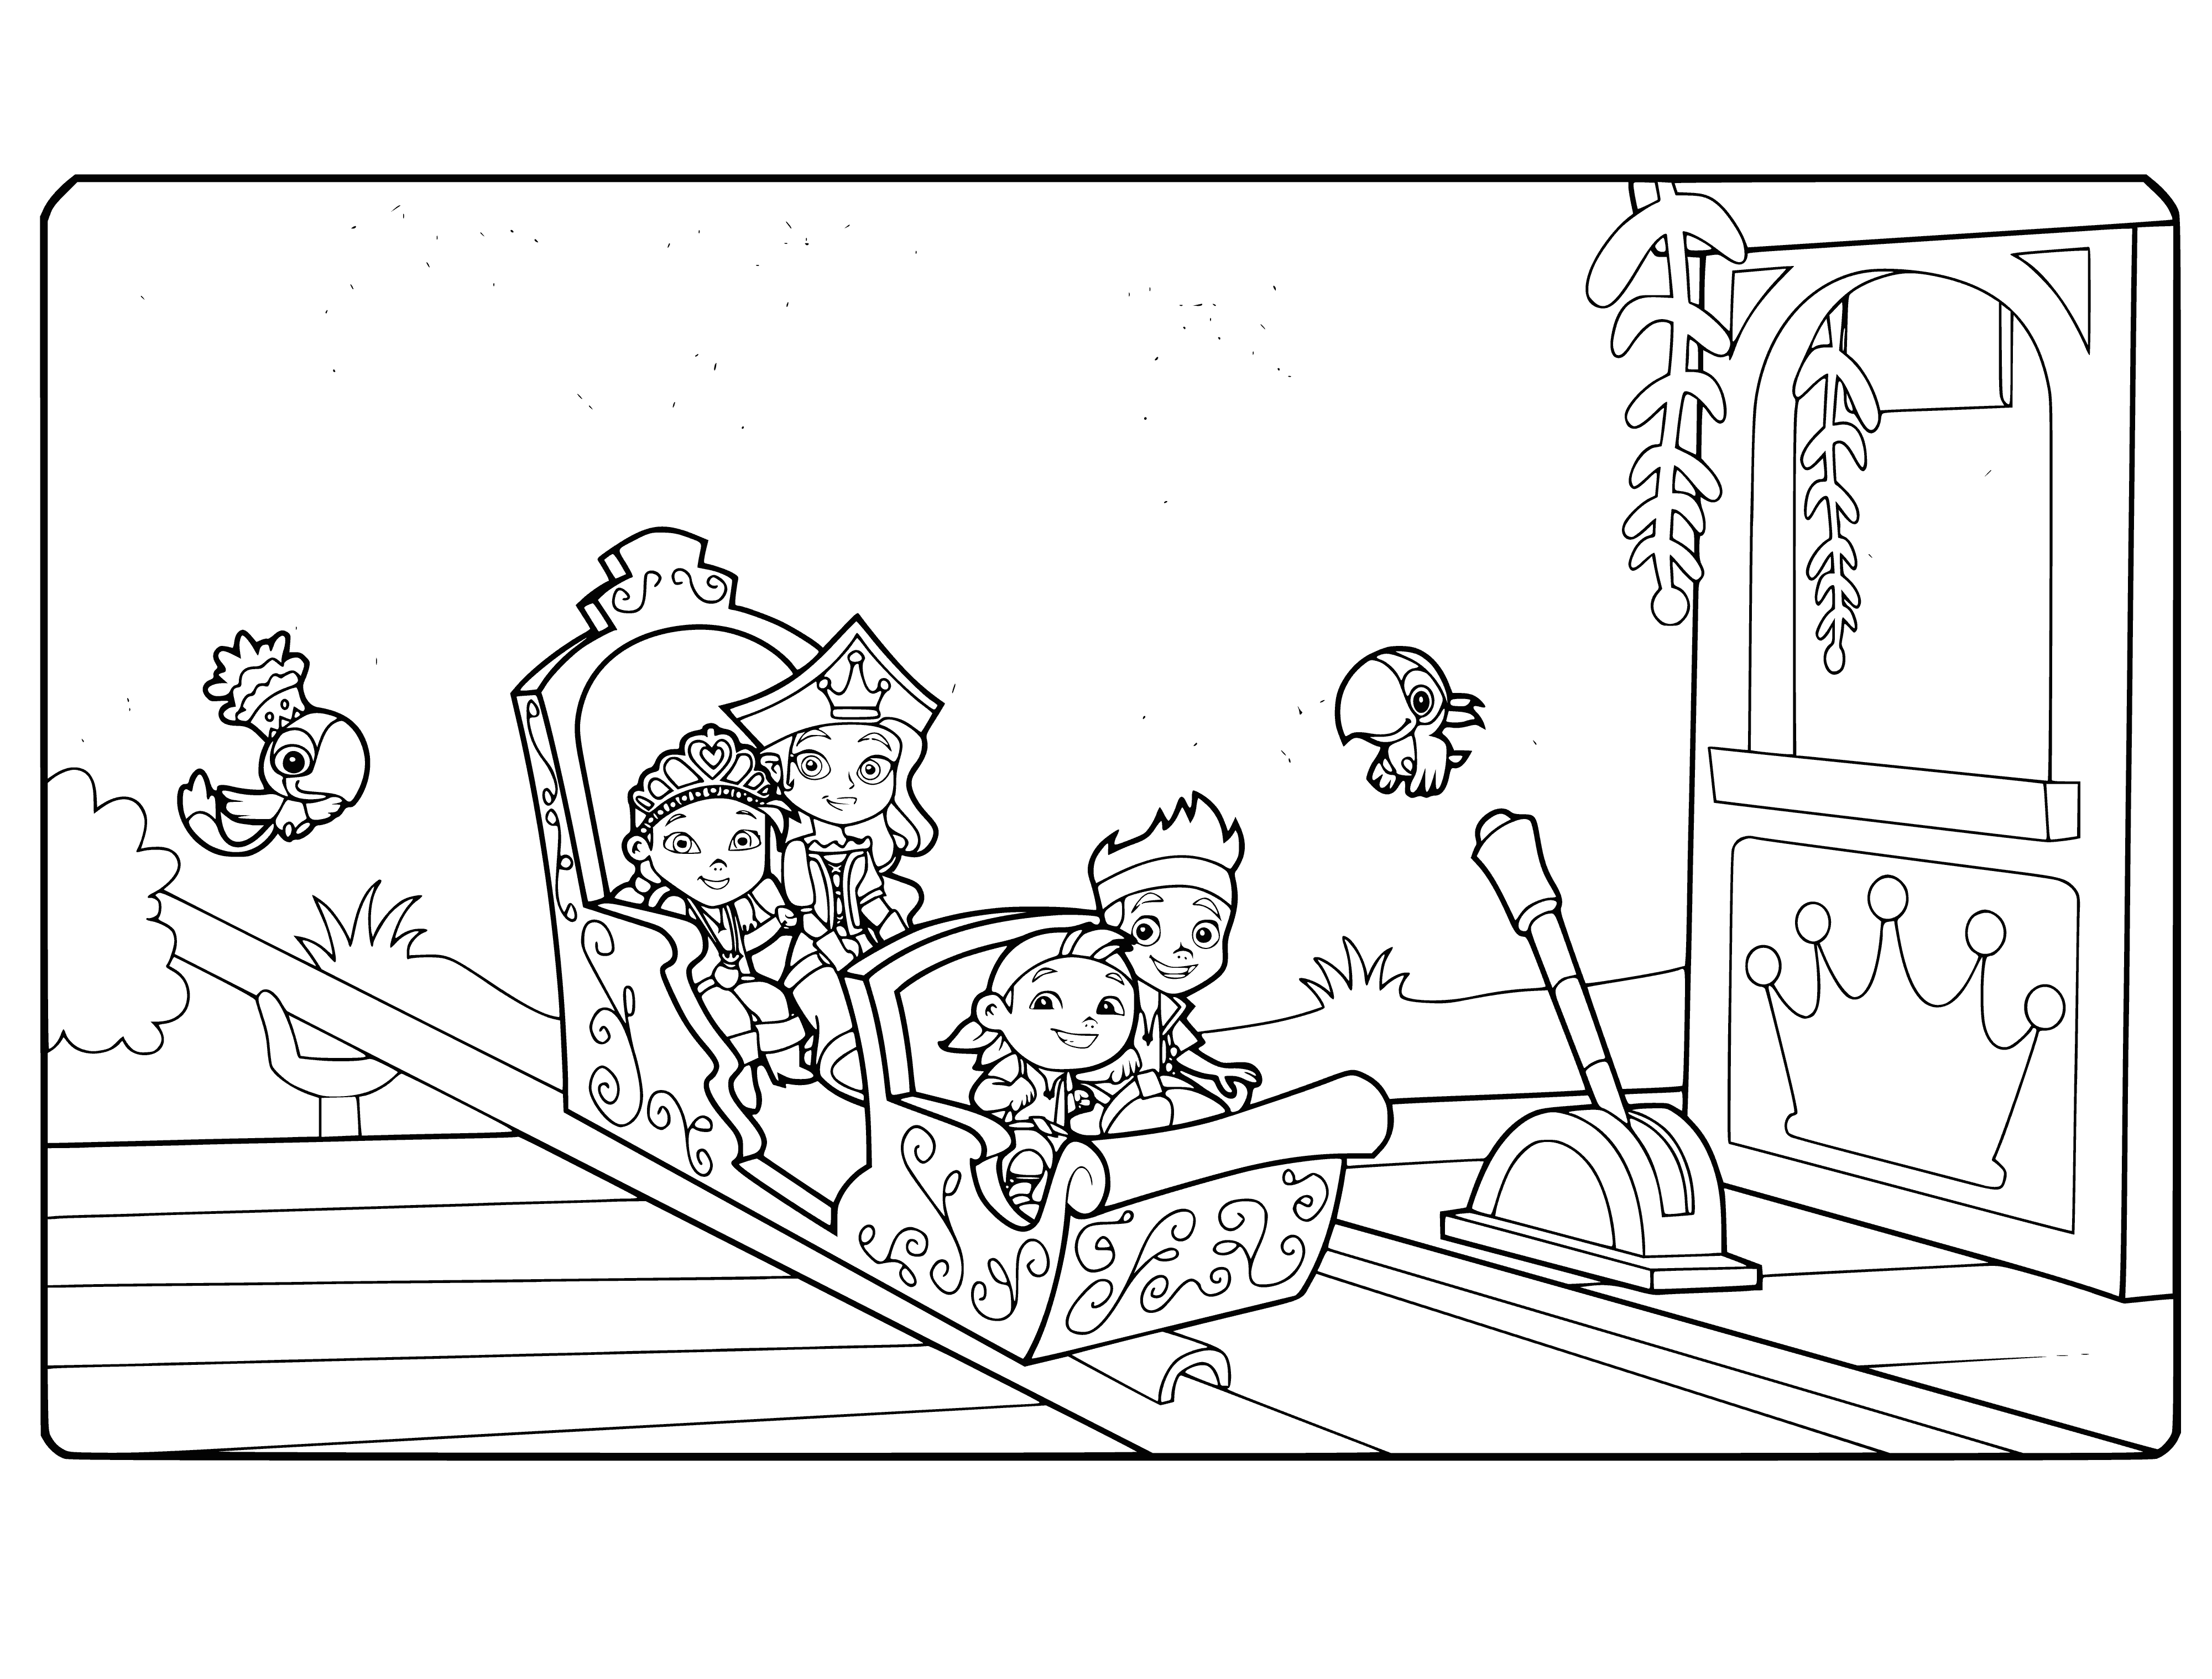 In the sleigh of the pirate princess coloring page